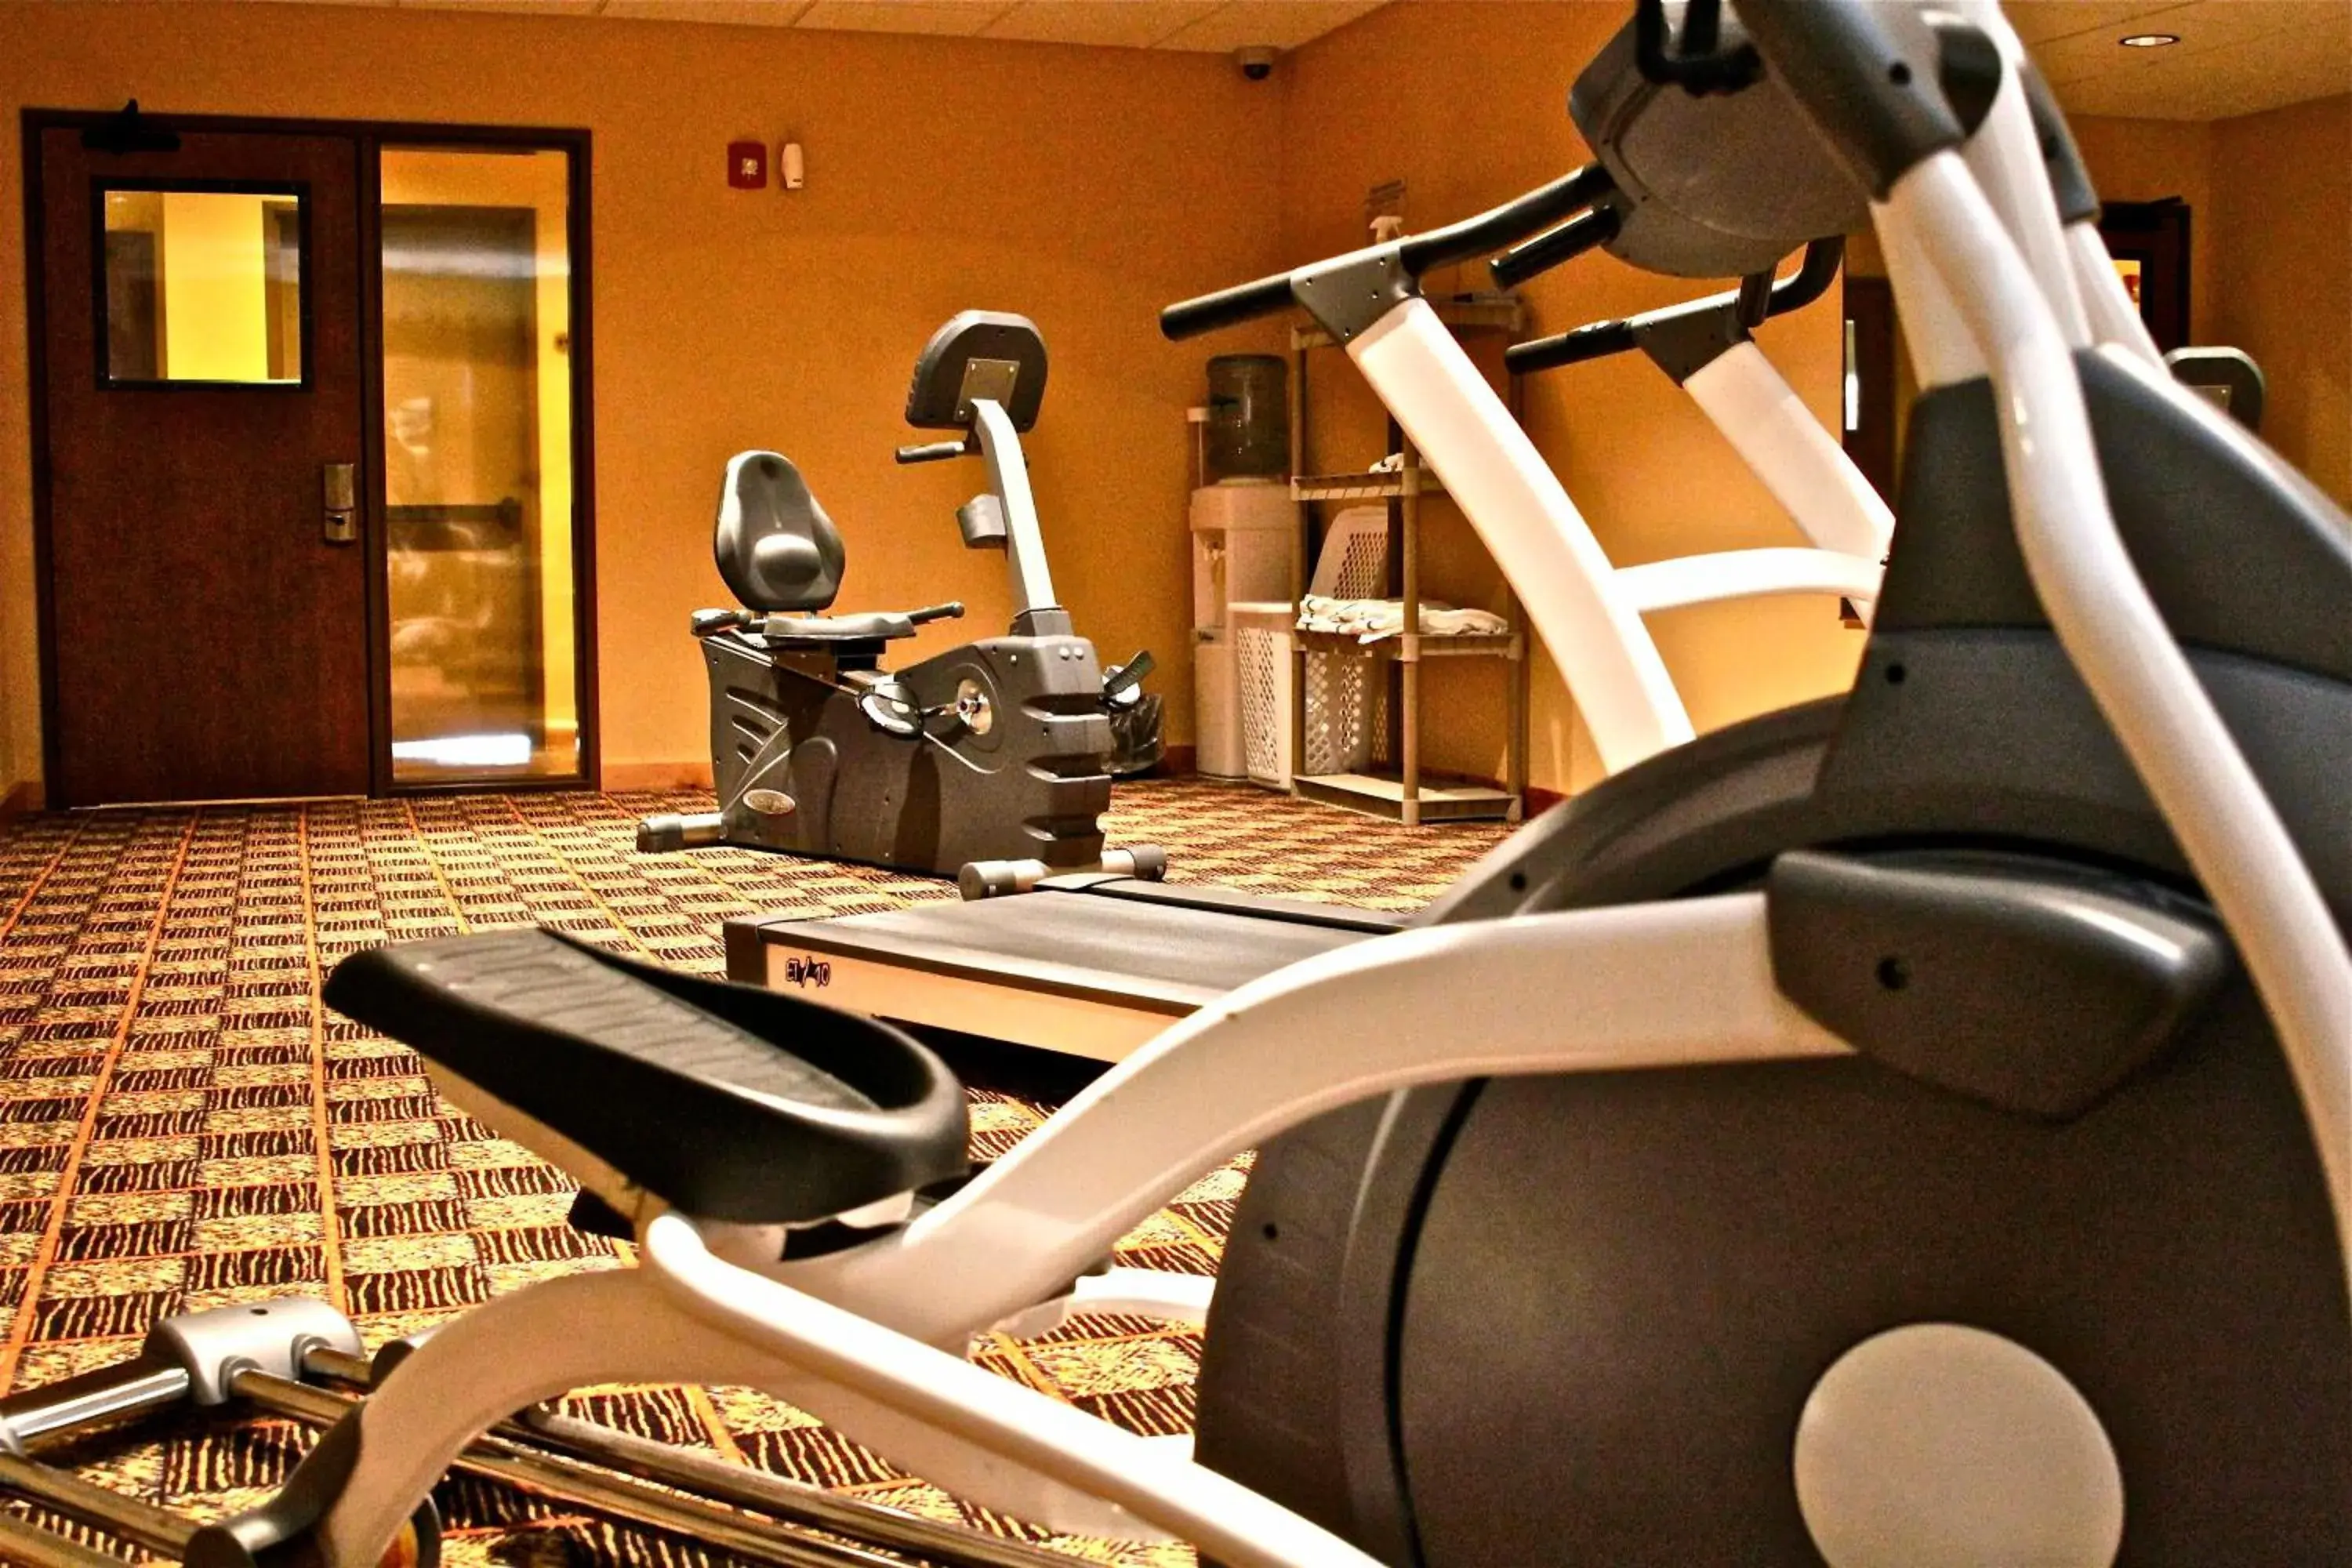 Fitness centre/facilities, Fitness Center/Facilities in Arbuckle Lodge Gillette